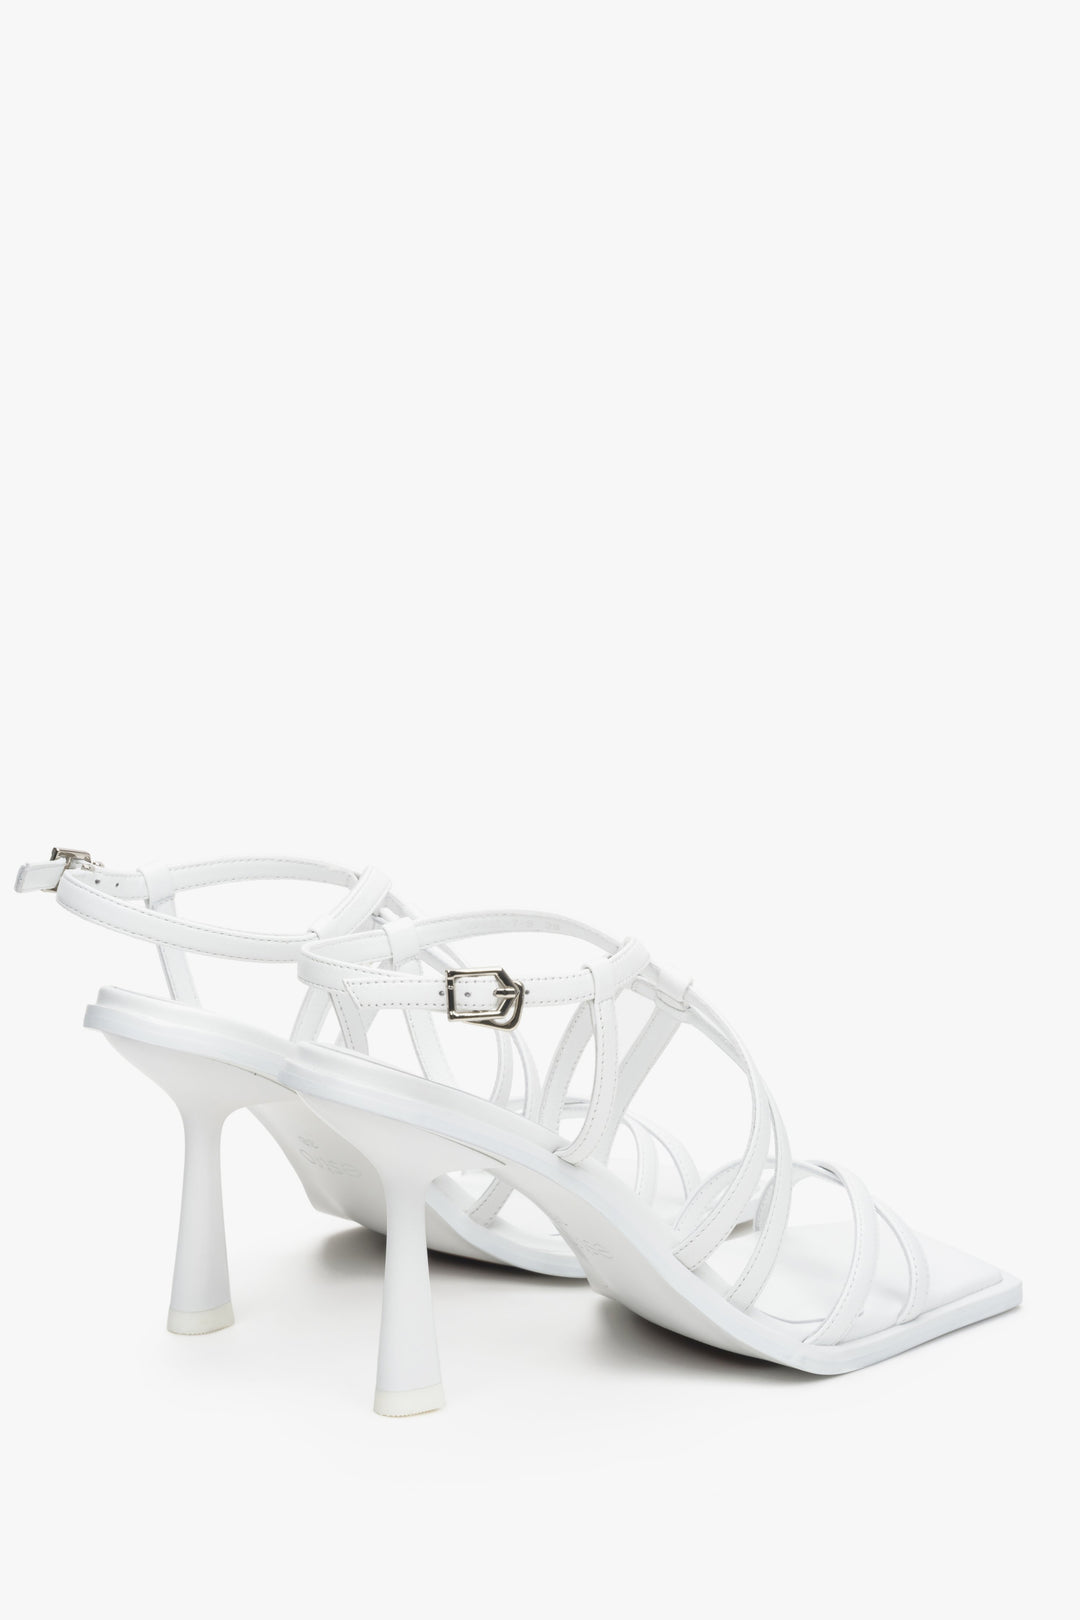 Women's heeled strappy sandals in white, Estro brand - a close-up on a funnel heel.